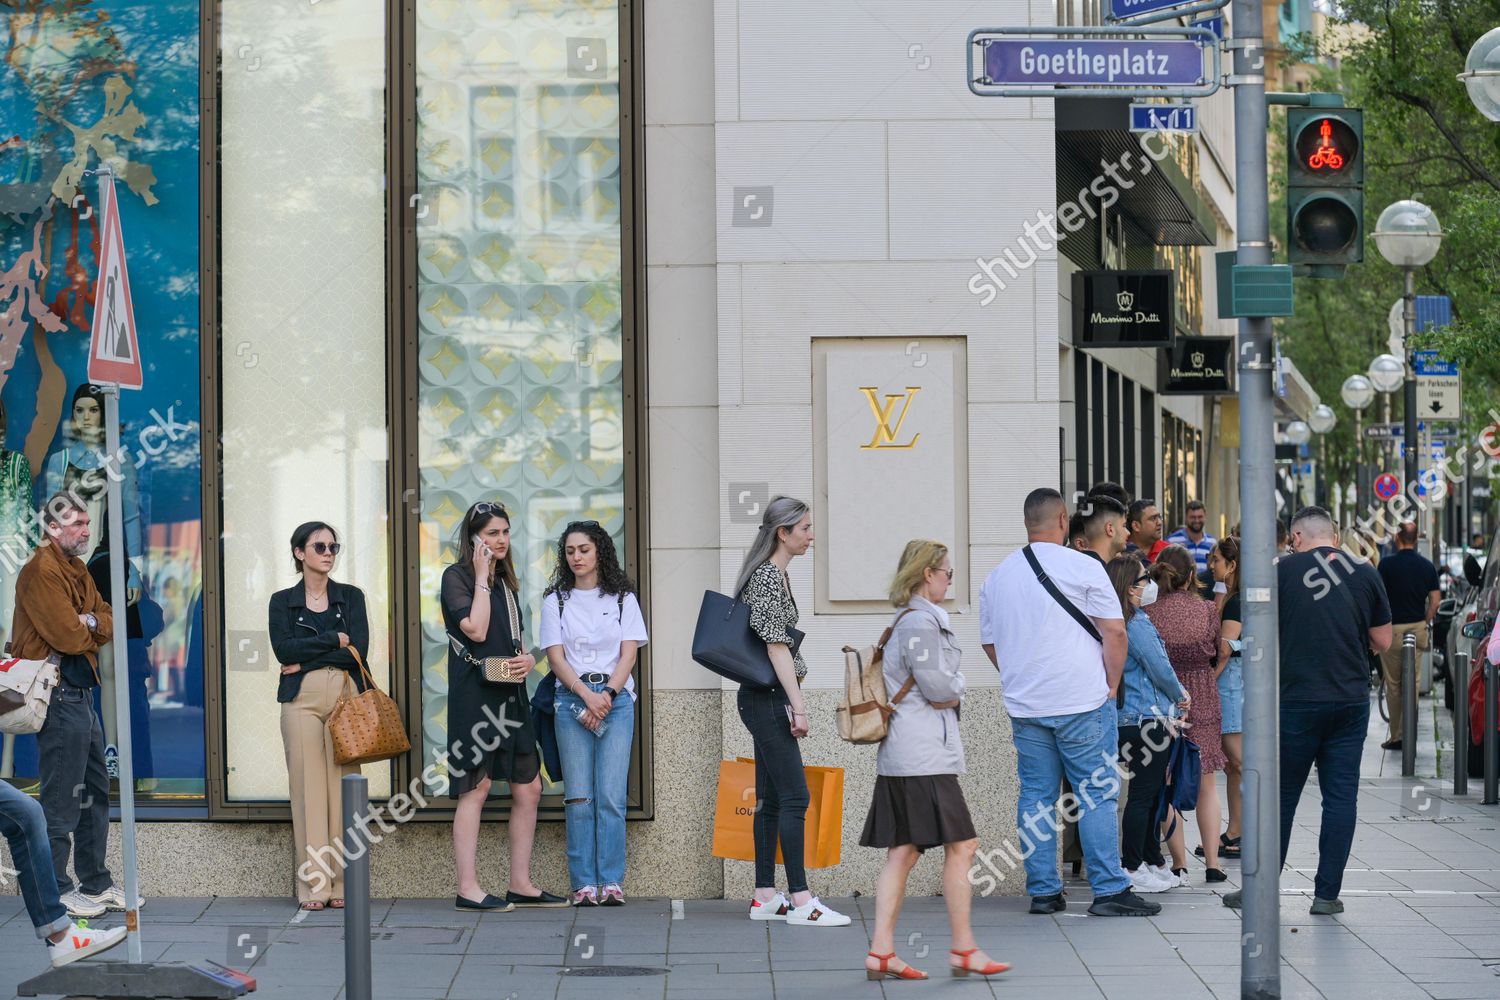 What are people lining up for at Louis Vuitton?